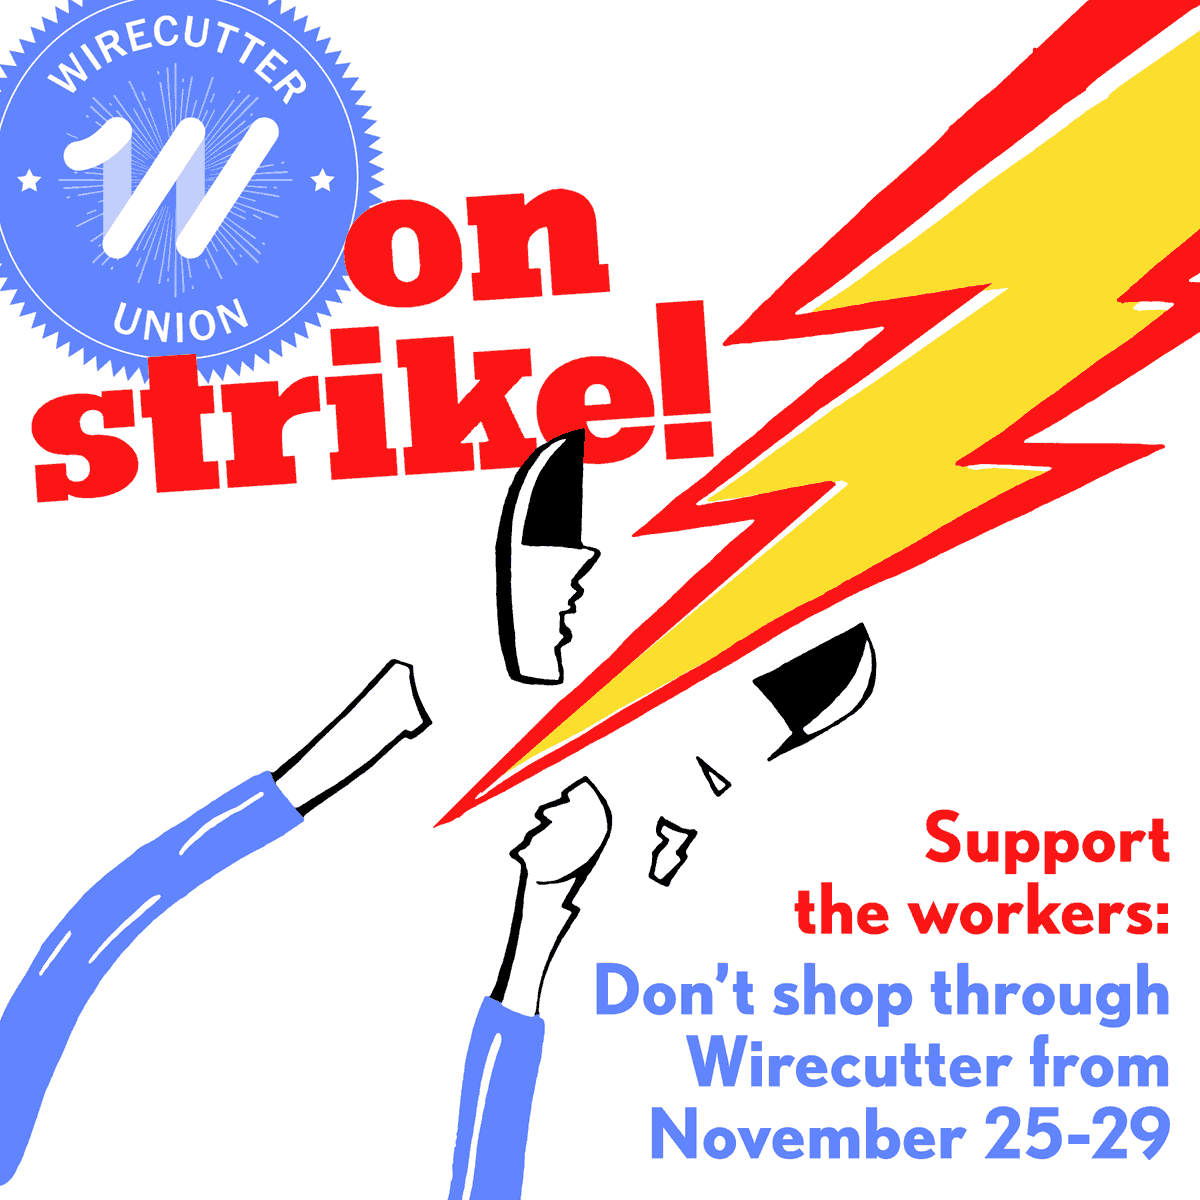 With @wirecutter/@nytimes management refusing to come to the table to reach a deal, 100% of our unit will be striking from Thanksgiving through Cyber Monday. The best way you can support us is by boycotting @wirecutter from 11/25-11/29: wirecutterunion.com/support-us/